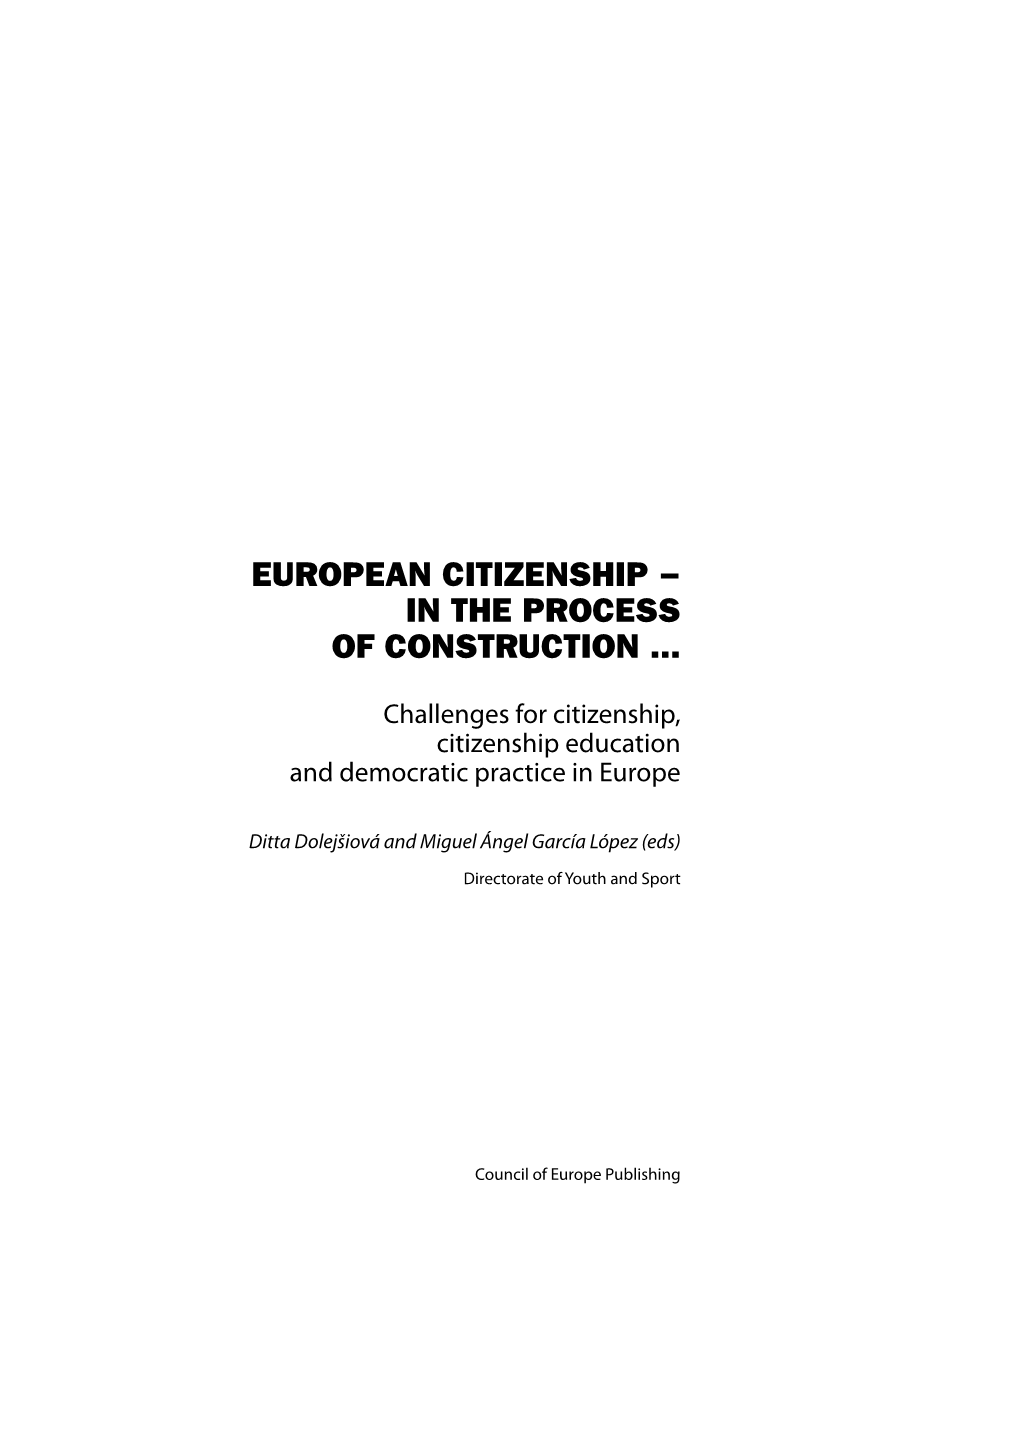 European Citizenship − in the Process of Construction